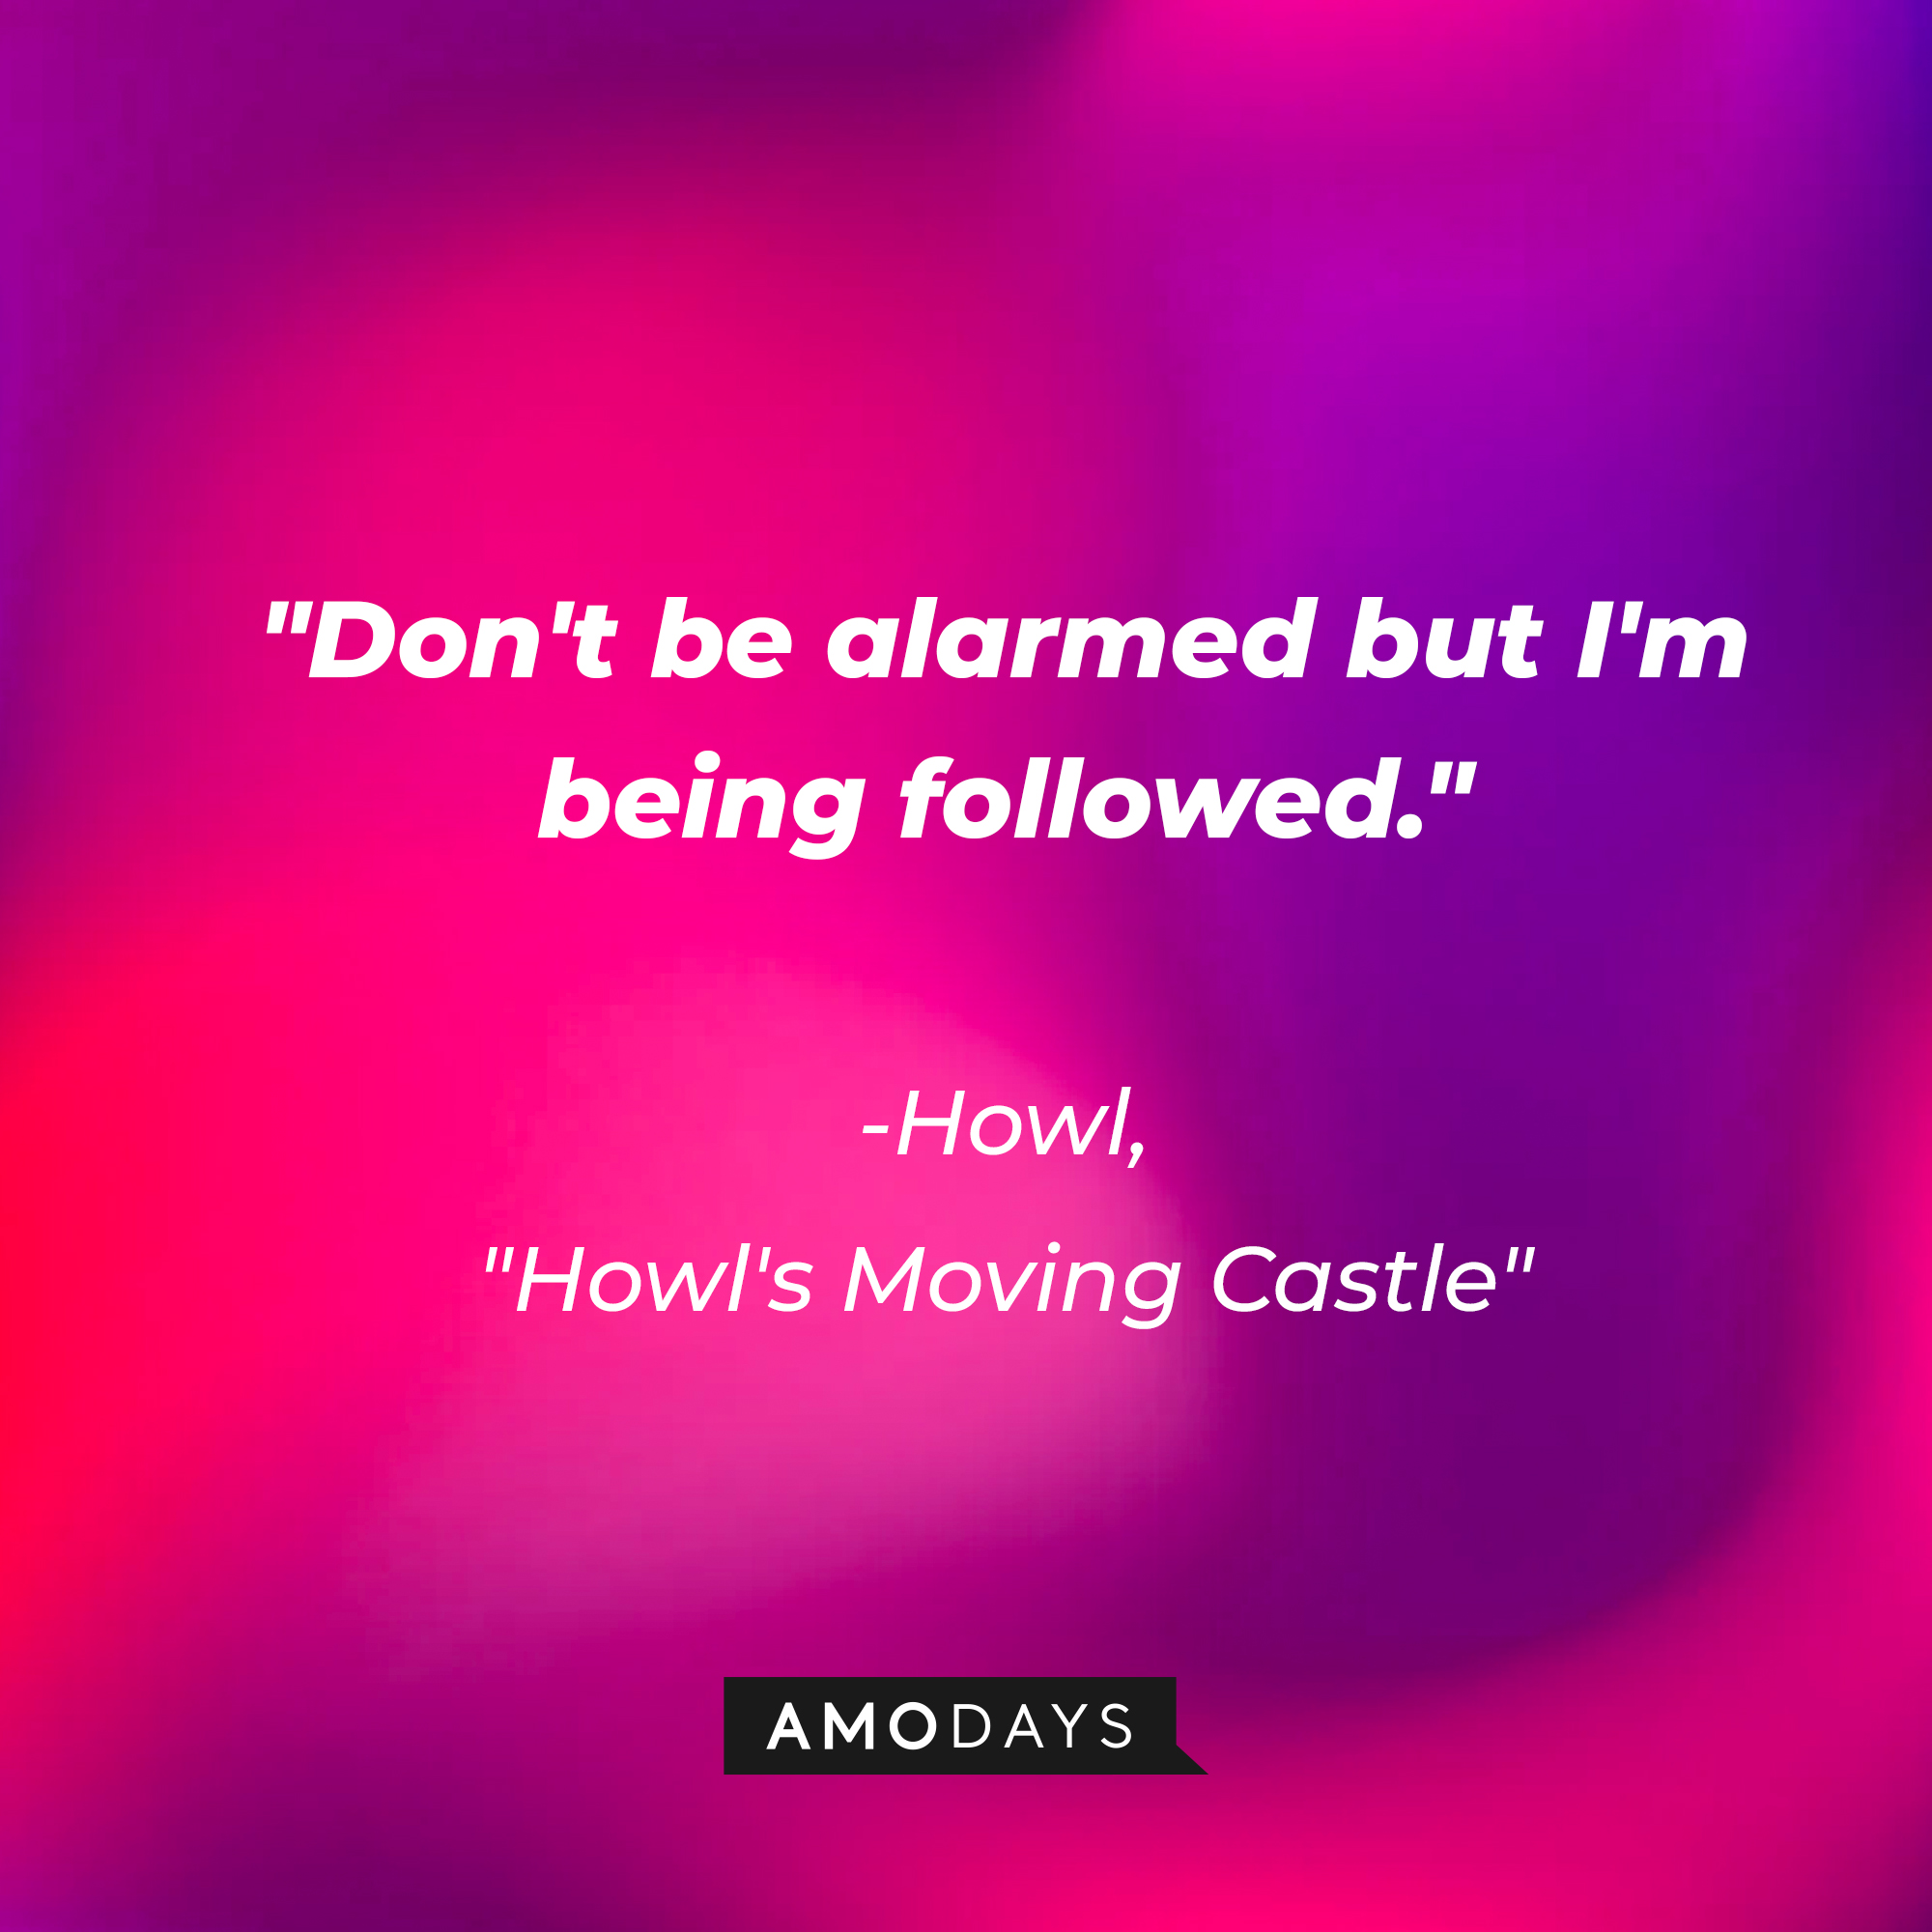 Howl's quote in "Howl's Moving Castle:" "Don't be alarmed but I'm being followed." | Source: AmoDays